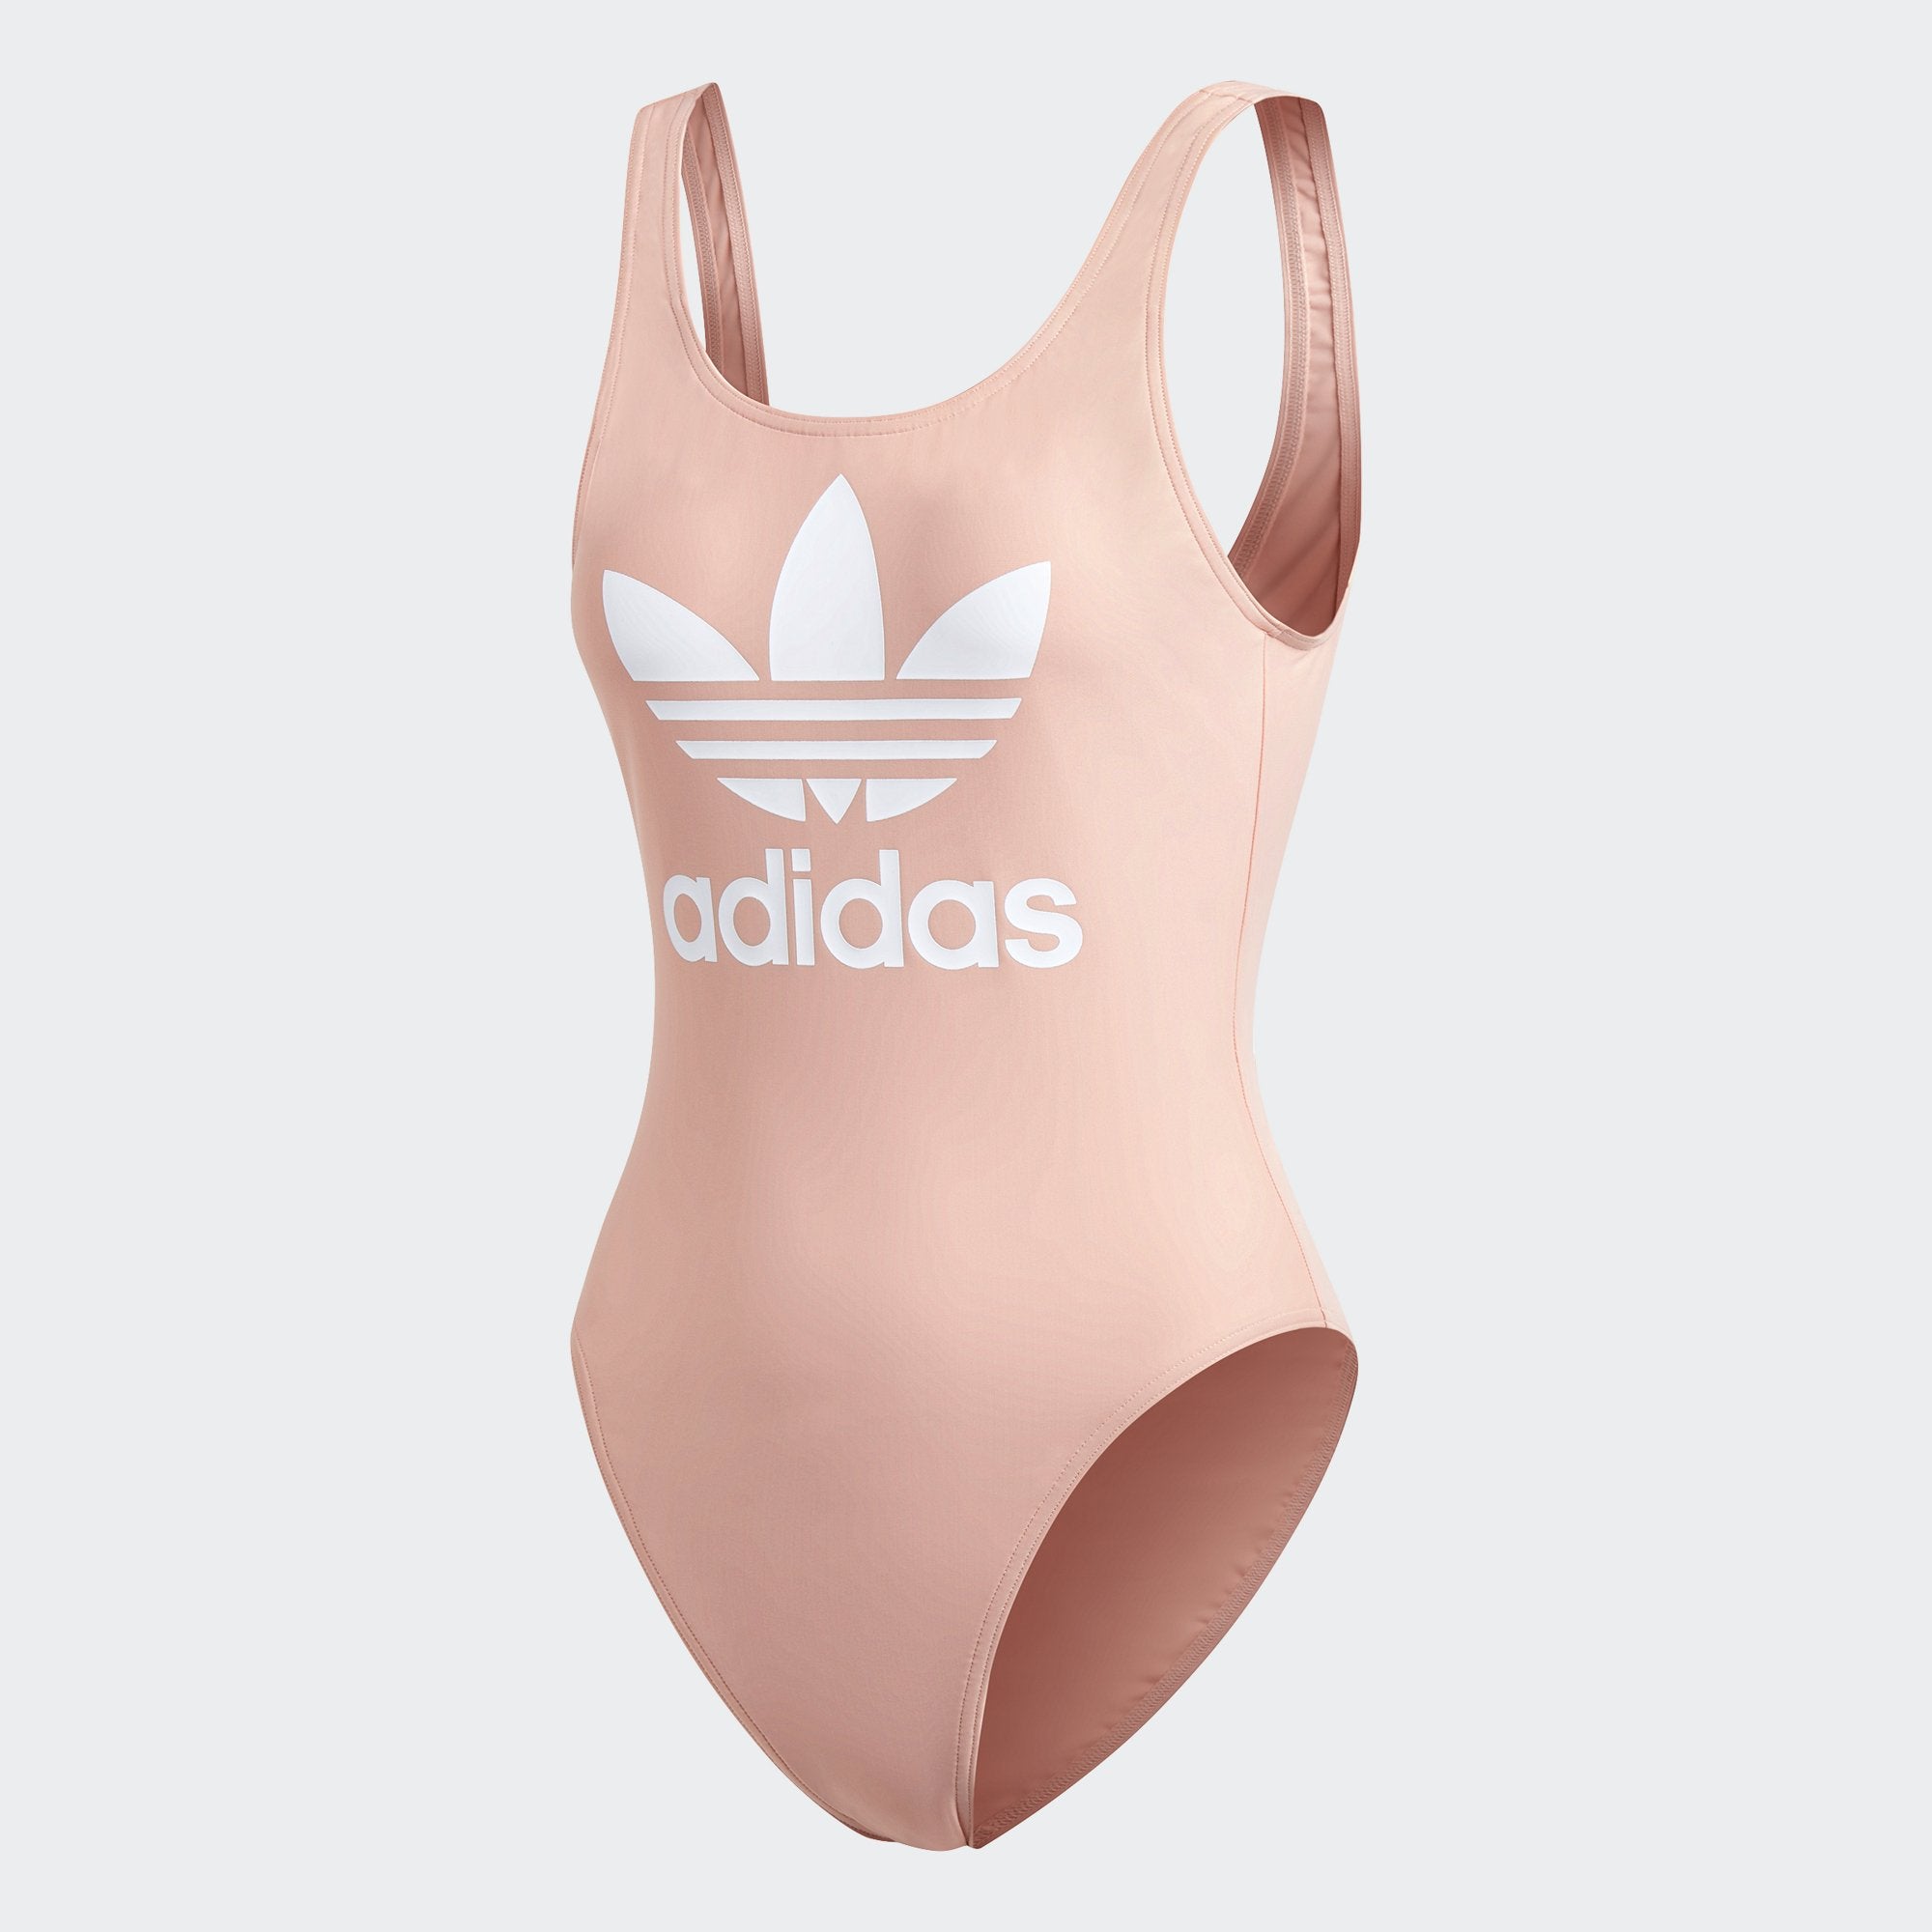 Adidas Originals Trefoil Swimsuit Women (Fast shipping) - HotelomegaShops - hoops 20 mid shoes core black womens